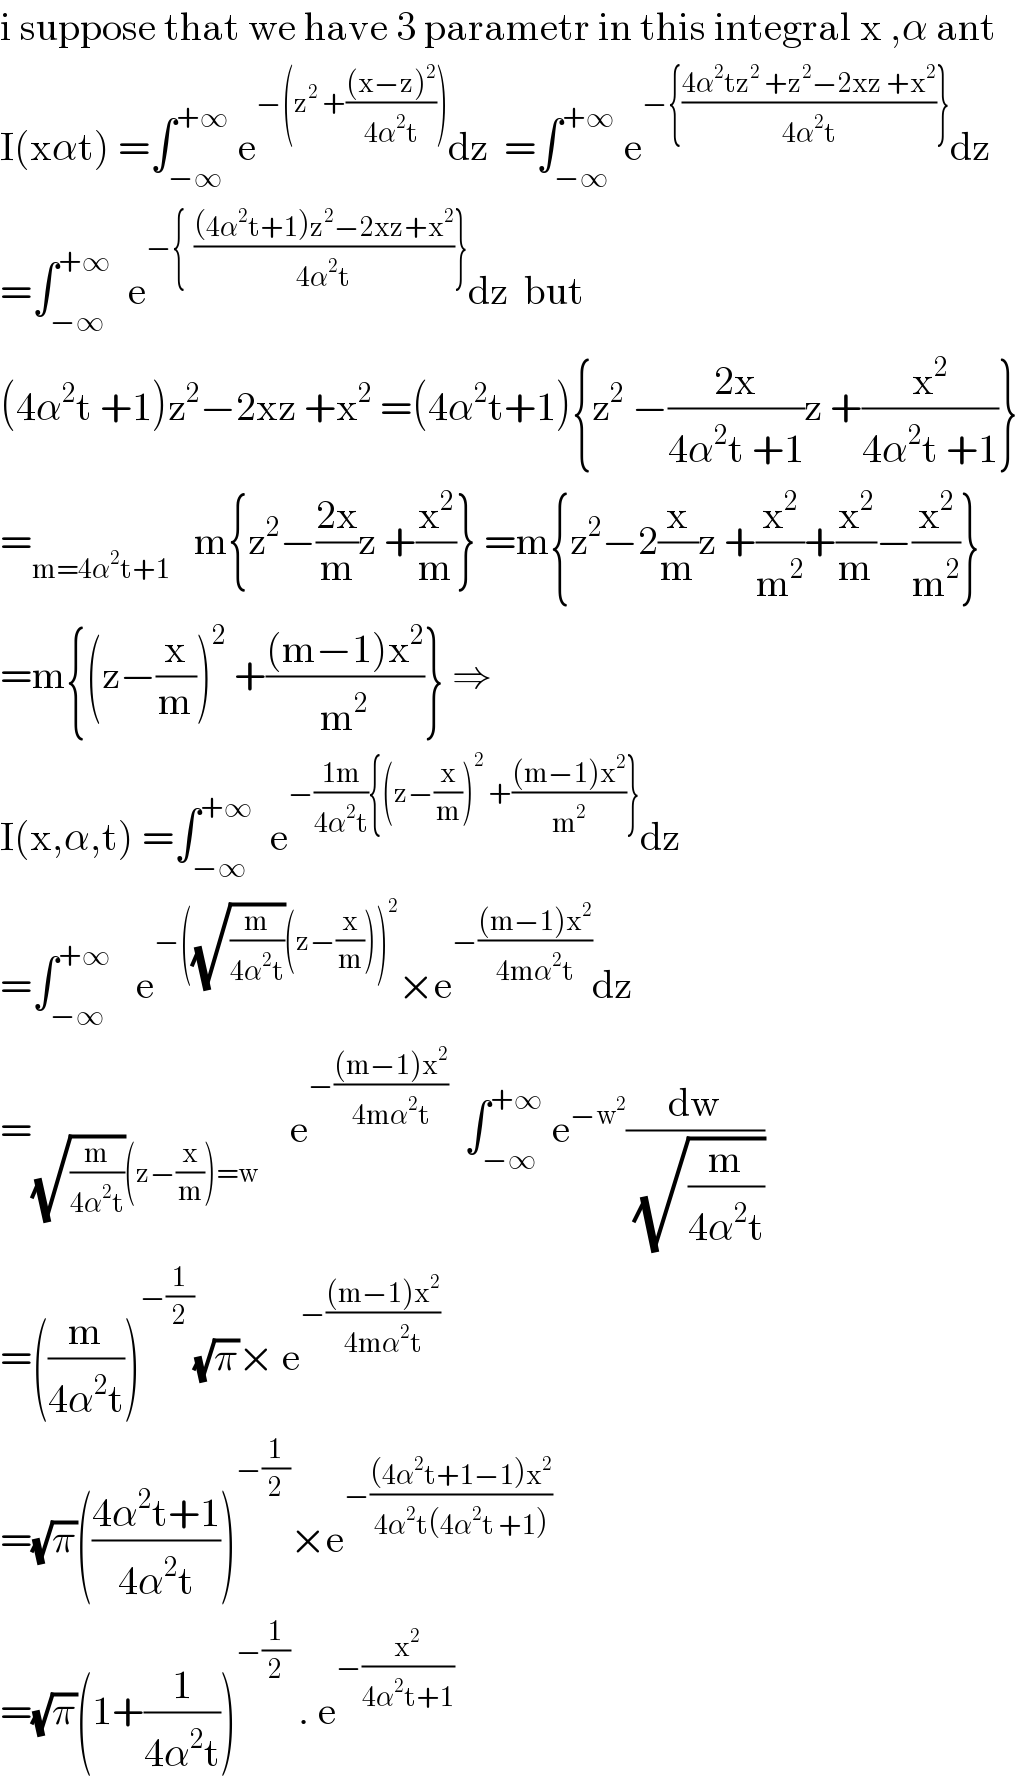 i suppose that we have 3 parametr in this integral x ,α ant  I(xαt) =∫_(−∞) ^(+∞)  e^(−(z^2  +(((x−z)^2 )/(4α^2 t)))) dz  =∫_(−∞) ^(+∞)  e^(−{((4α^2 tz^2  +z^2 −2xz +x^2 )/(4α^2 t))}) dz  =∫_(−∞) ^(+∞)   e^(−{  (((4α^2 t+1)z^2 −2xz+x^2 )/(4α^2 t))}) dz  but  (4α^2 t +1)z^2 −2xz +x^2  =(4α^2 t+1){z^2  −((2x)/(4α^2 t +1))z +(x^2 /(4α^2 t +1))}  =_(m=4α^2 t+1)    m{z^2 −((2x)/m)z +(x^2 /m)} =m{z^2 −2(x/m)z +(x^2 /m^2 )+(x^2 /m)−(x^2 /m^2 )}  =m{(z−(x/m))^2  +(((m−1)x^2 )/m^2 )} ⇒  I(x,α,t) =∫_(−∞) ^(+∞)   e^(−((1m)/(4α^2 t)){(z−(x/m))^2  +(((m−1)x^2 )/m^2 )}) dz  =∫_(−∞) ^(+∞)    e^(−((√(m/(4α^2 t)))(z−(x/m)))^2 ) ×e^(−(((m−1)x^2 )/(4mα^2 t))) dz  =_((√(m/(4α^2 t)))(z−(x/m))=w)     e^(−(((m−1)x^2 )/(4mα^2 t)))   ∫_(−∞) ^(+∞)  e^(−w^2 ) (dw/( (√(m/(4α^2 t)))))     =((m/(4α^2 t)))^(−(1/2)) (√π)× e^(−(((m−1)x^2 )/(4mα^2 t)))   =(√π)(((4α^2 t+1)/(4α^2 t)))^(−(1/2)) ×e^(−(((4α^2 t+1−1)x^2 )/(4α^2 t(4α^2 t +1))))   =(√π)(1+(1/(4α^2 t)))^(−(1/2))  . e^(−(x^2 /(4α^2 t+1)))   